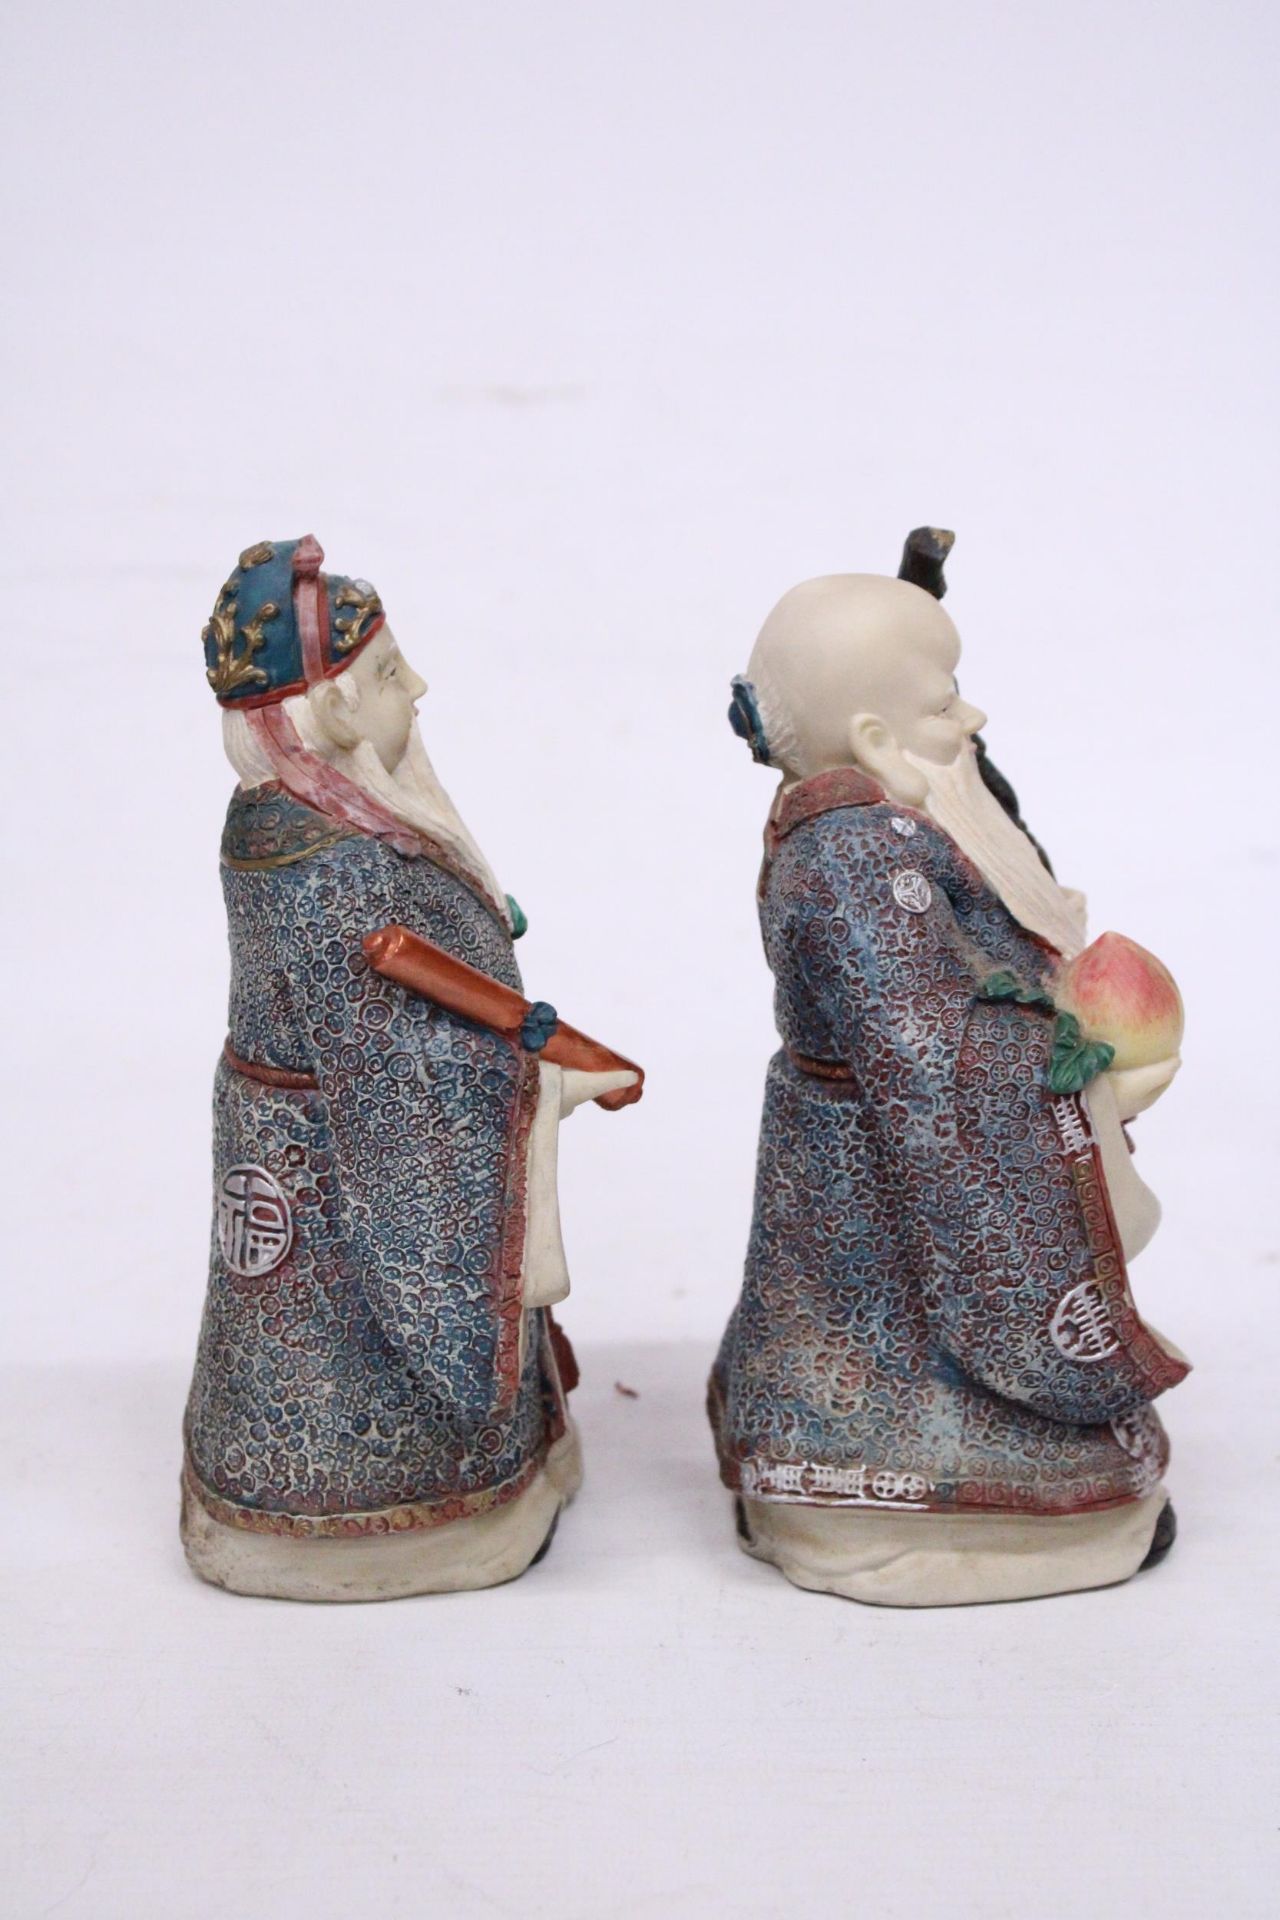 TWO HEAVY STONE MANDARIN FIGURES - 7 INCH (H) - Image 4 of 6